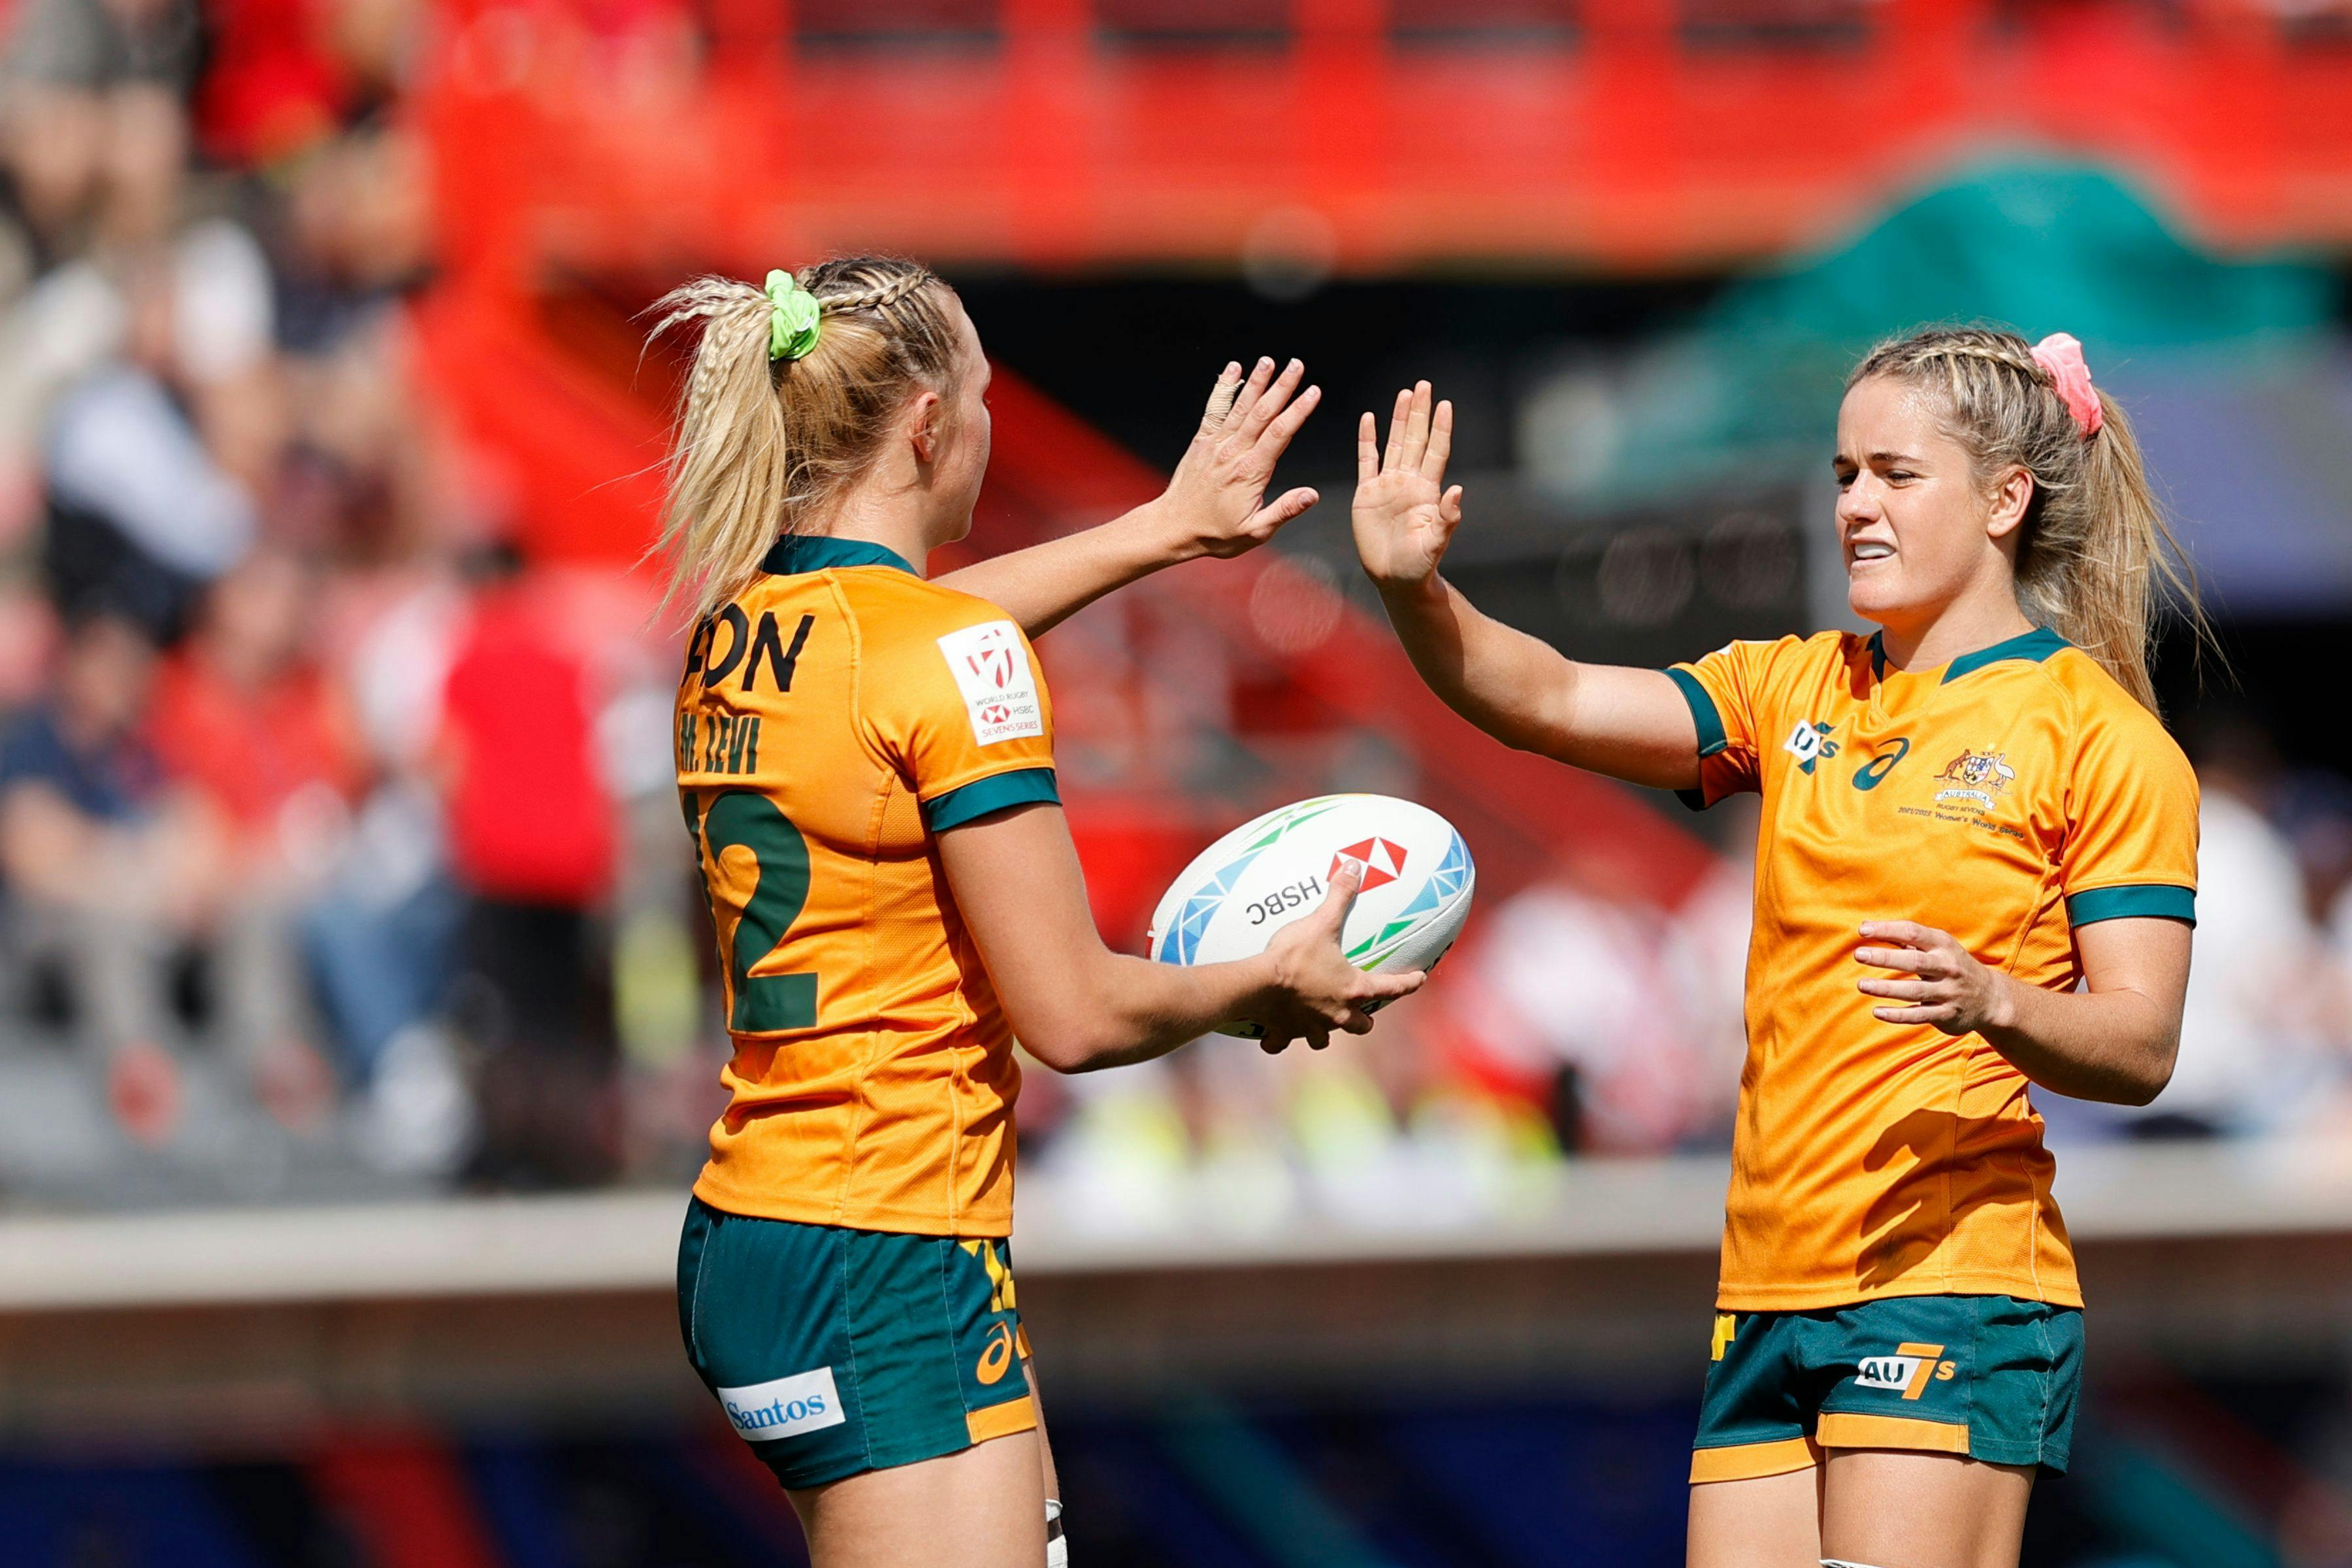 Australia's Maddison Levi and Dominique du Toit celebrate a try against South Africa on day one of the HSBC France Sevens women's competition at Stade Toulousain on 20 May, 2022 in Toulouse, France. Photo credit: Mike Lee - KLC fotos for World Rugby